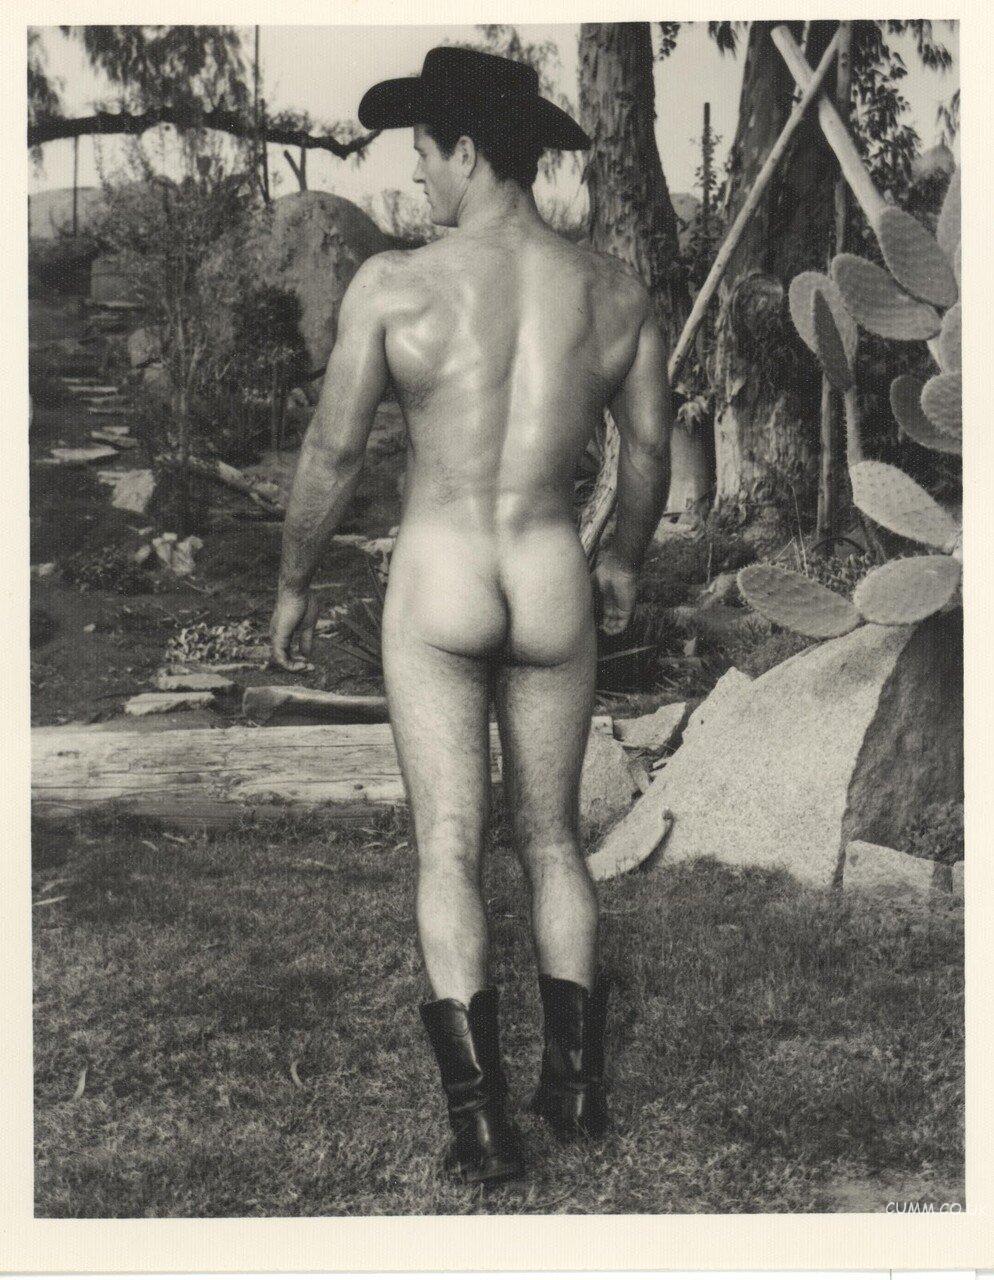 Dick Project - dick dean vintage gay porn arse cowboy â€“ The HaPenis Project